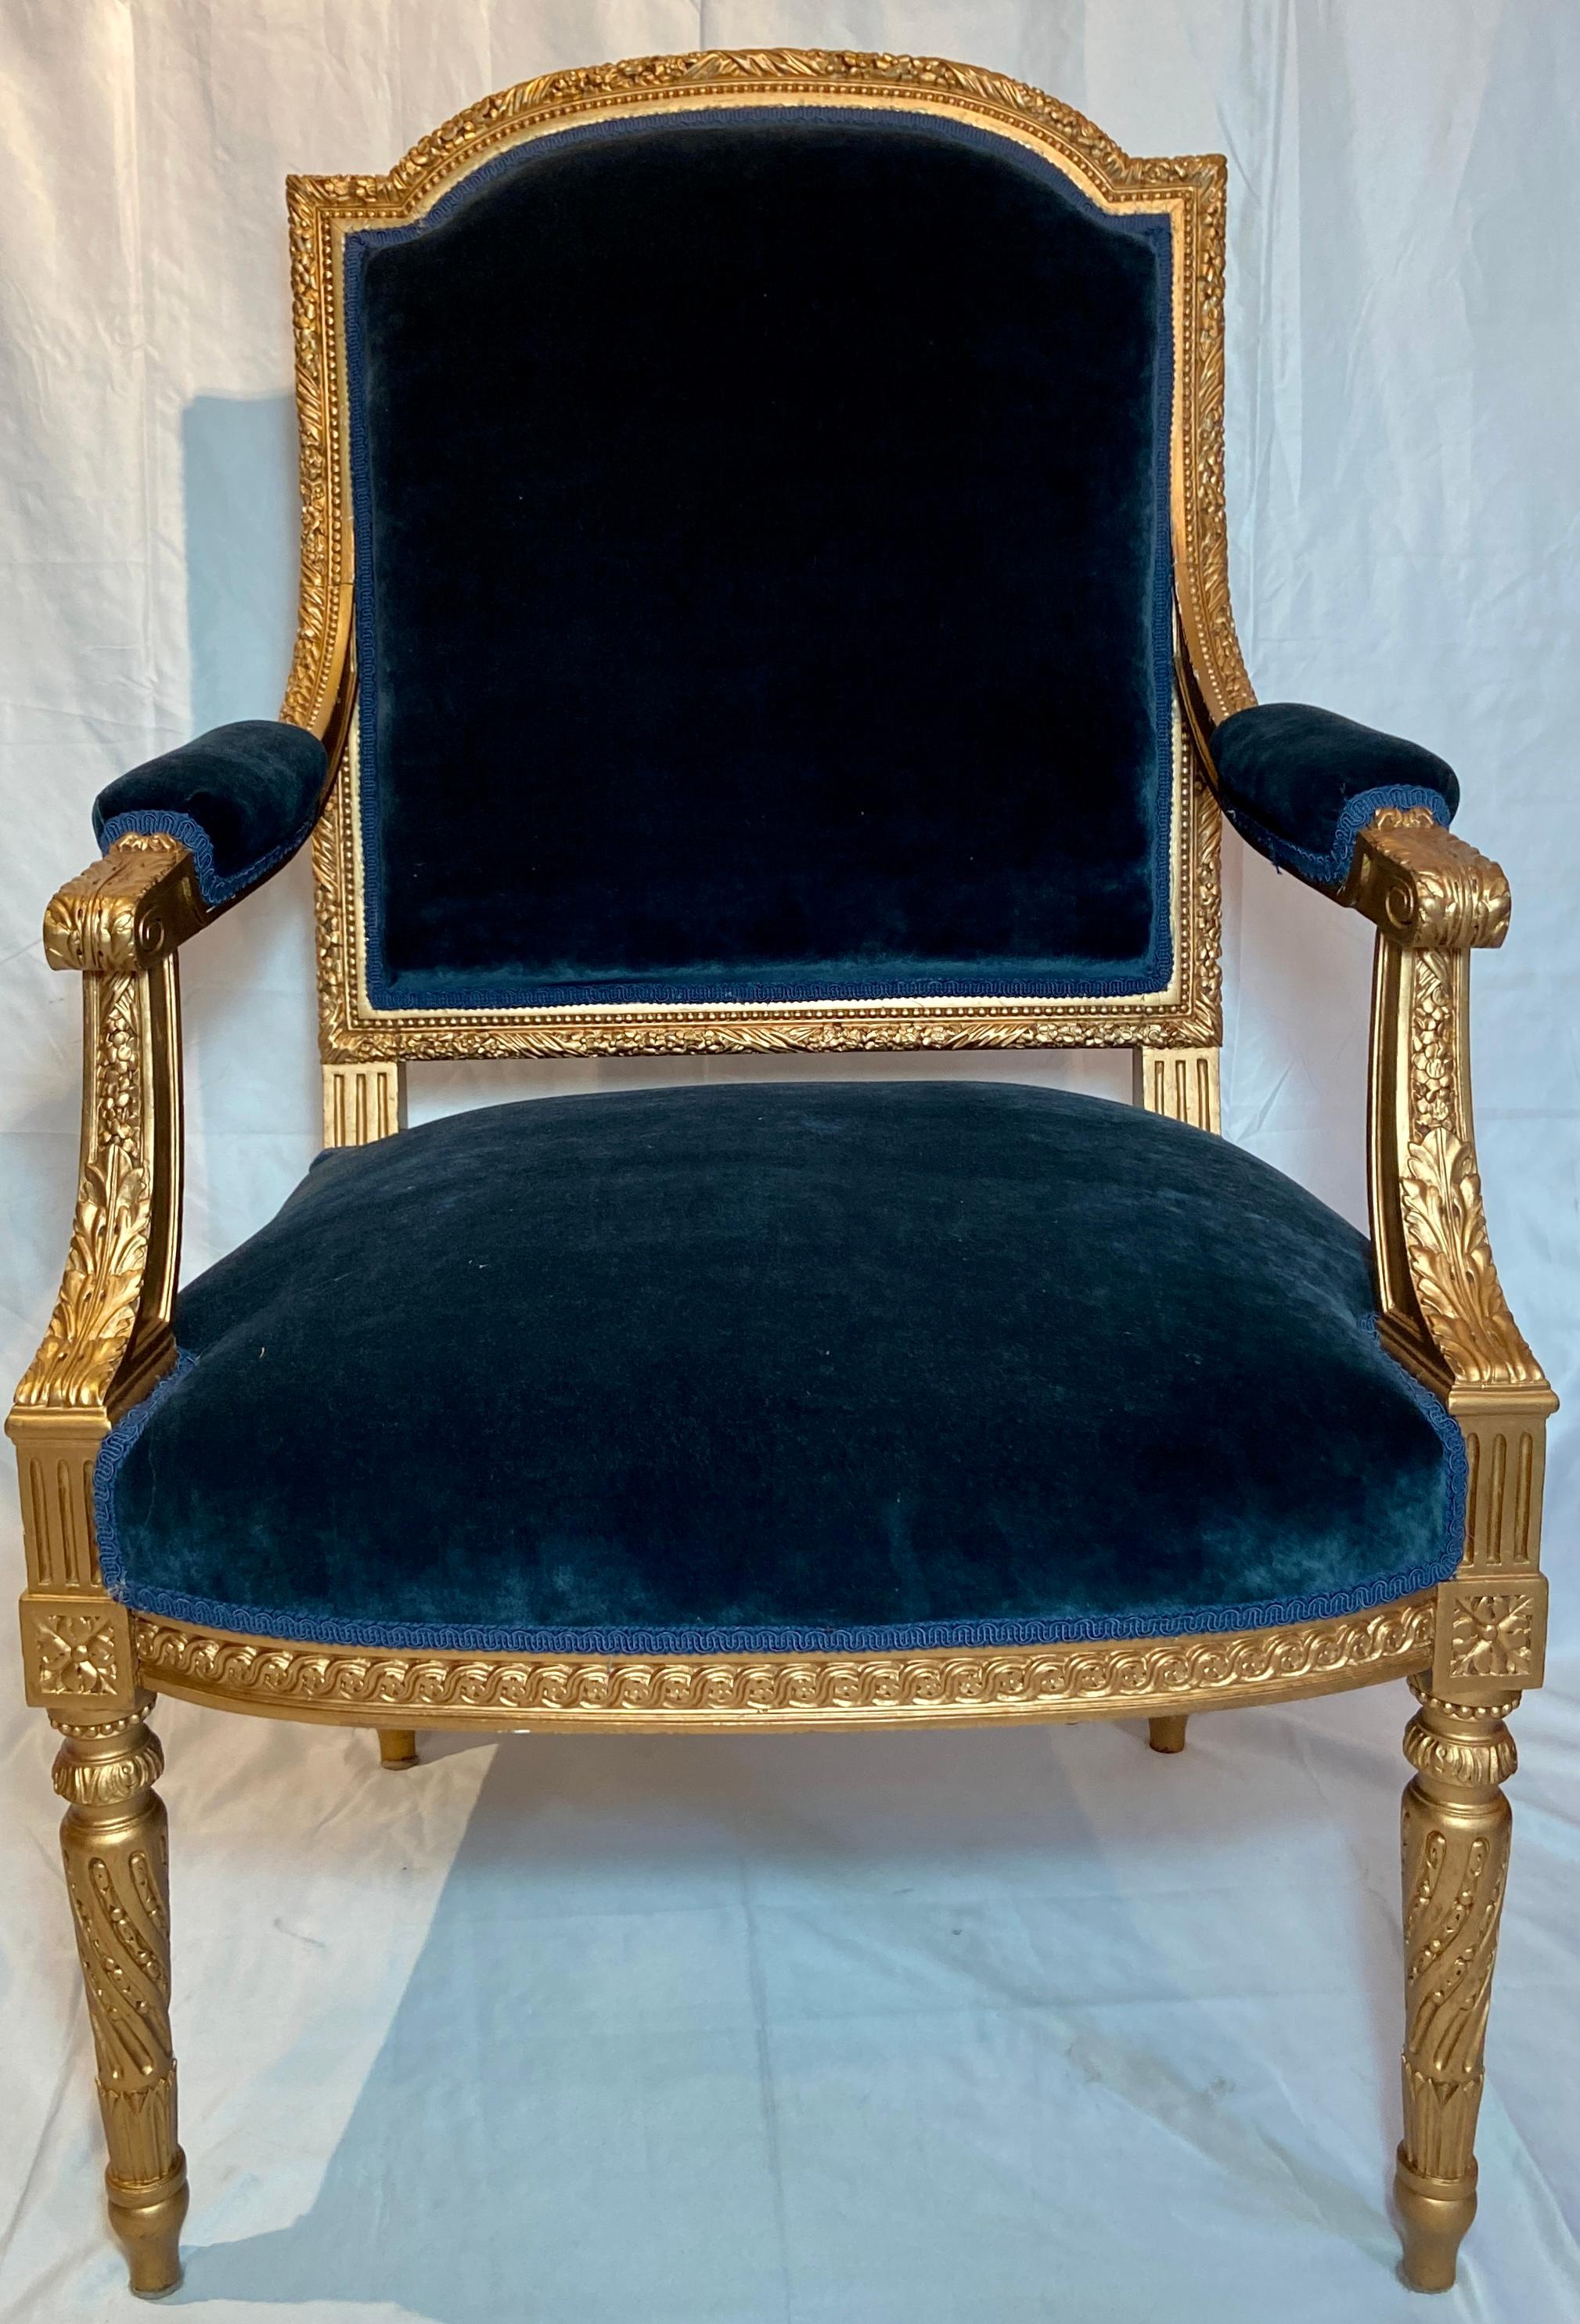 These beautiful arm chairs were recently reupholstered in a nice shade of royal navy blue. They have pleasing, traditional Louis XVI lines.